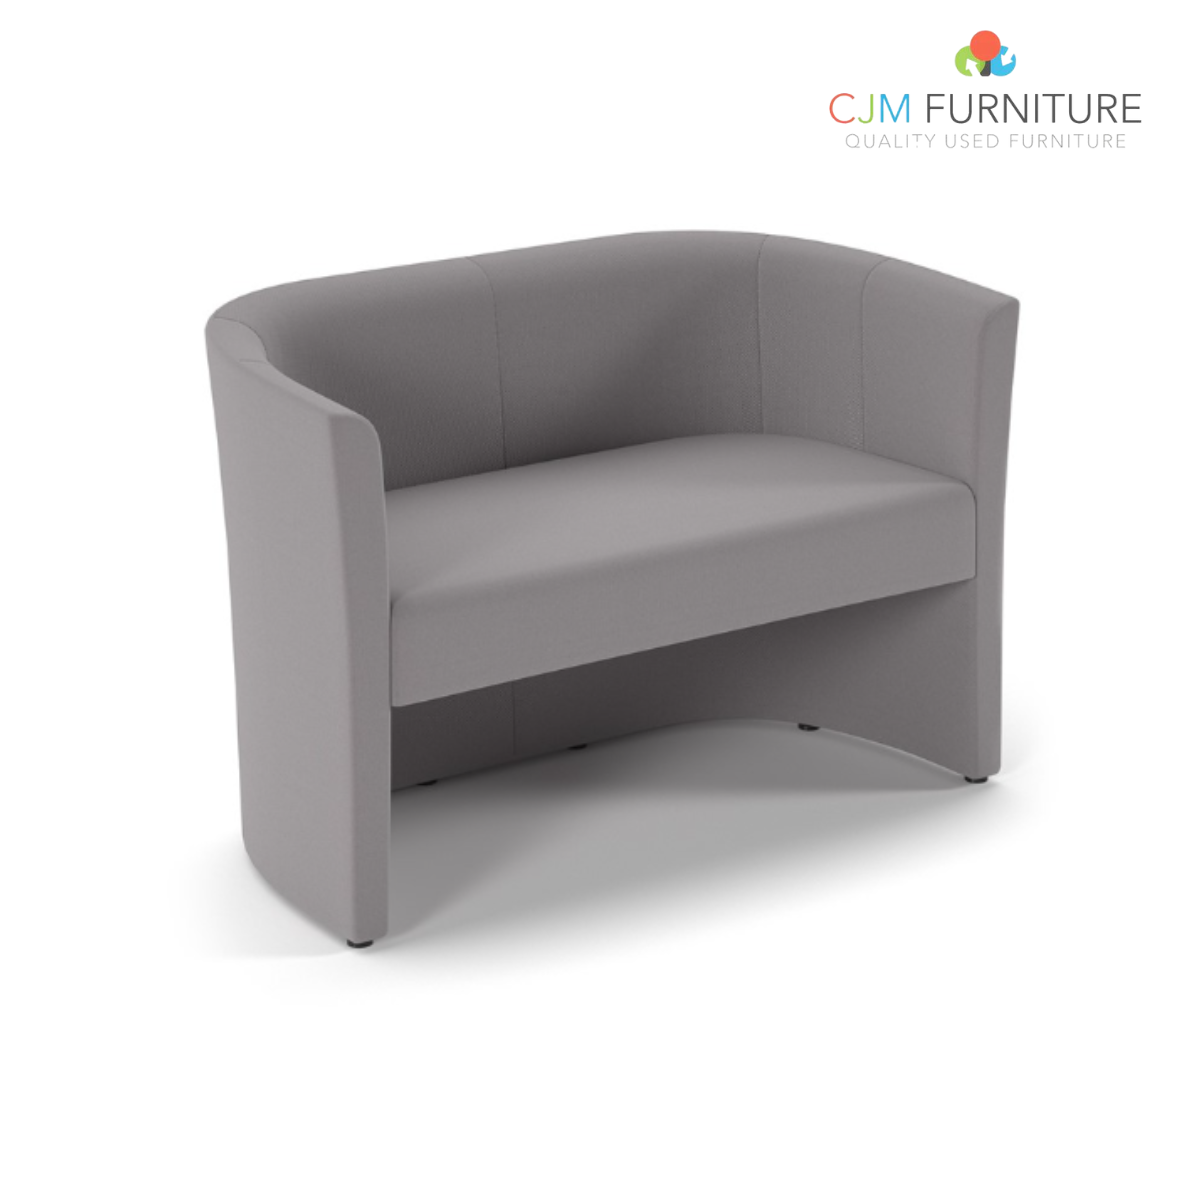 Celestra two seater sofa 1300mm wide - Various Fabrics 08/03/22